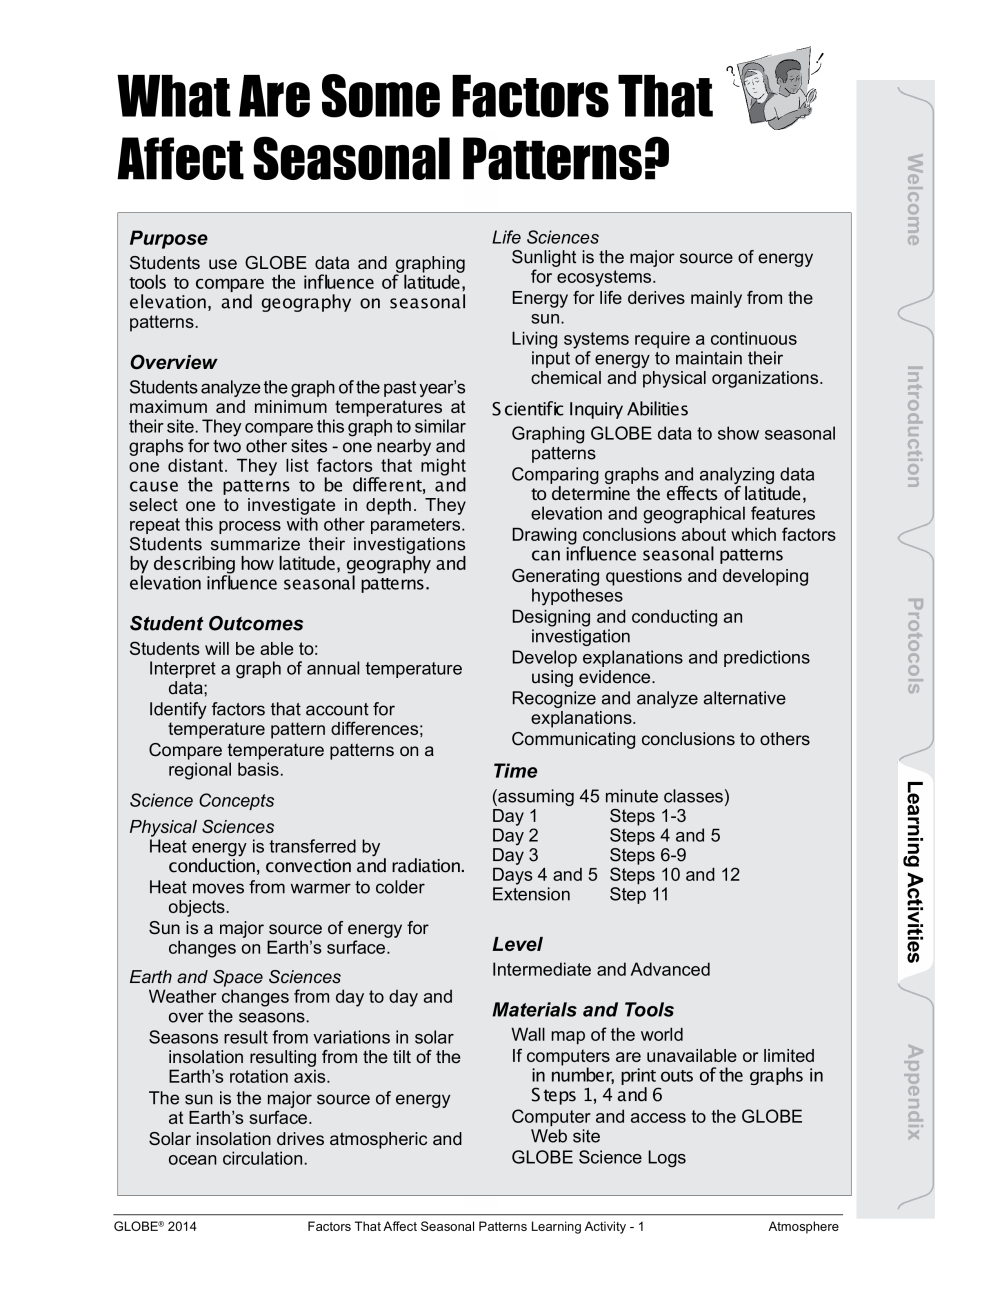 Learning Activities preview for What Are Some Factors That Affect Seasonal Patterns